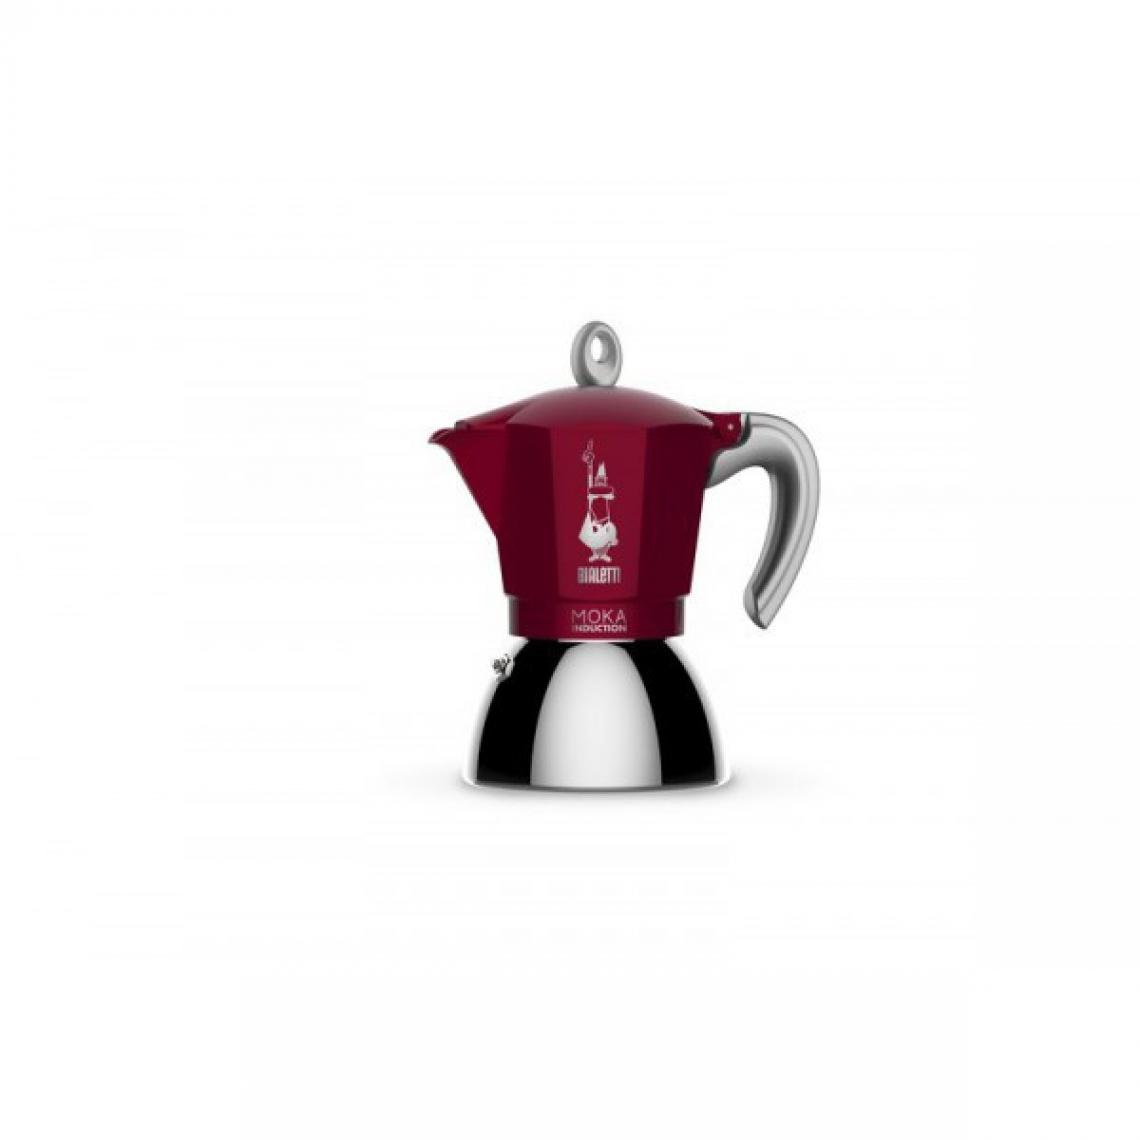 Bialetti - BIALETTI Cafetière 6 tasses Moka Induction rouge 0006946 - Expresso - Cafetière